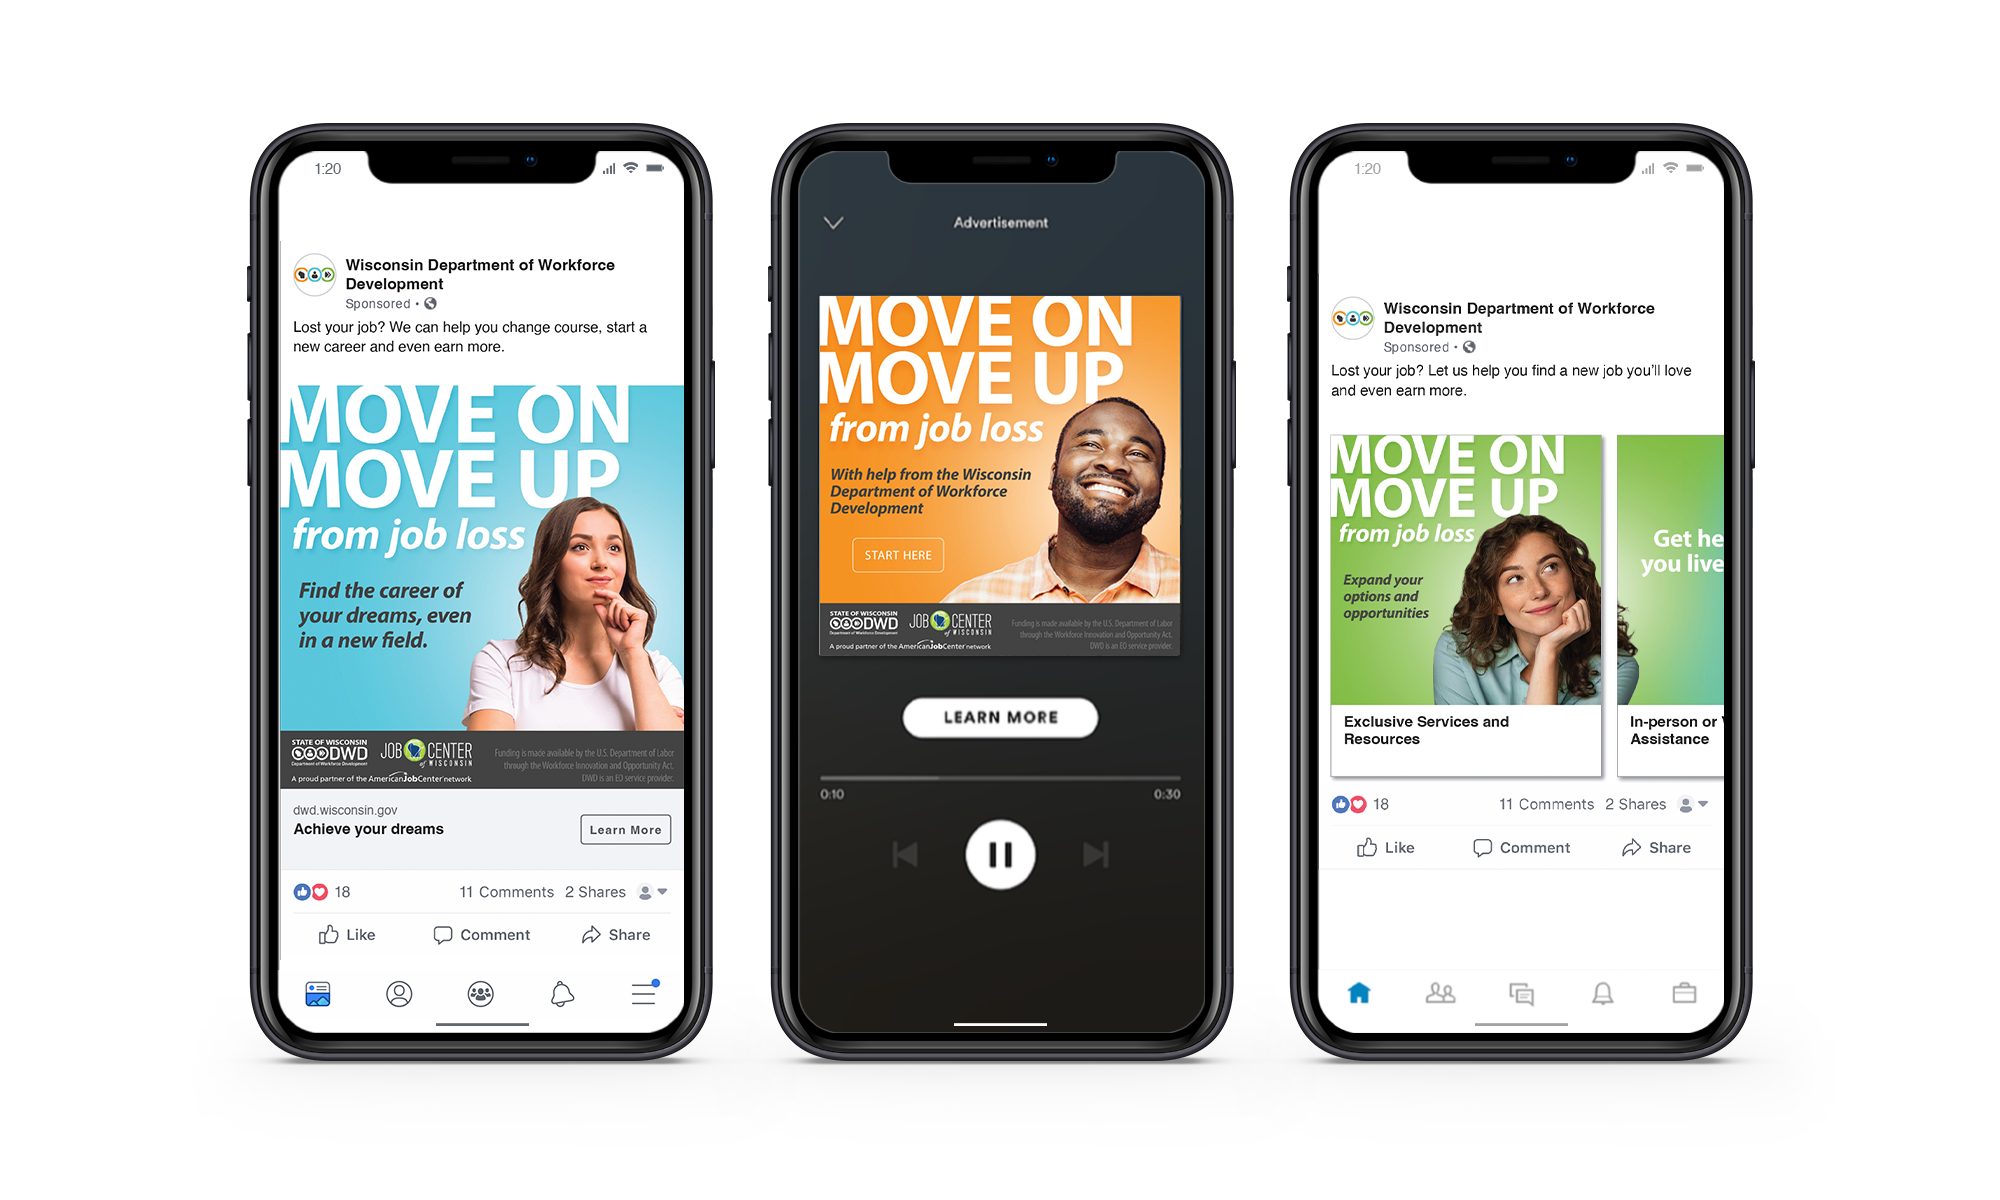 Three Wisconsin Department of Workforce Development ads with move on move up headline displayed on mobile phone screens